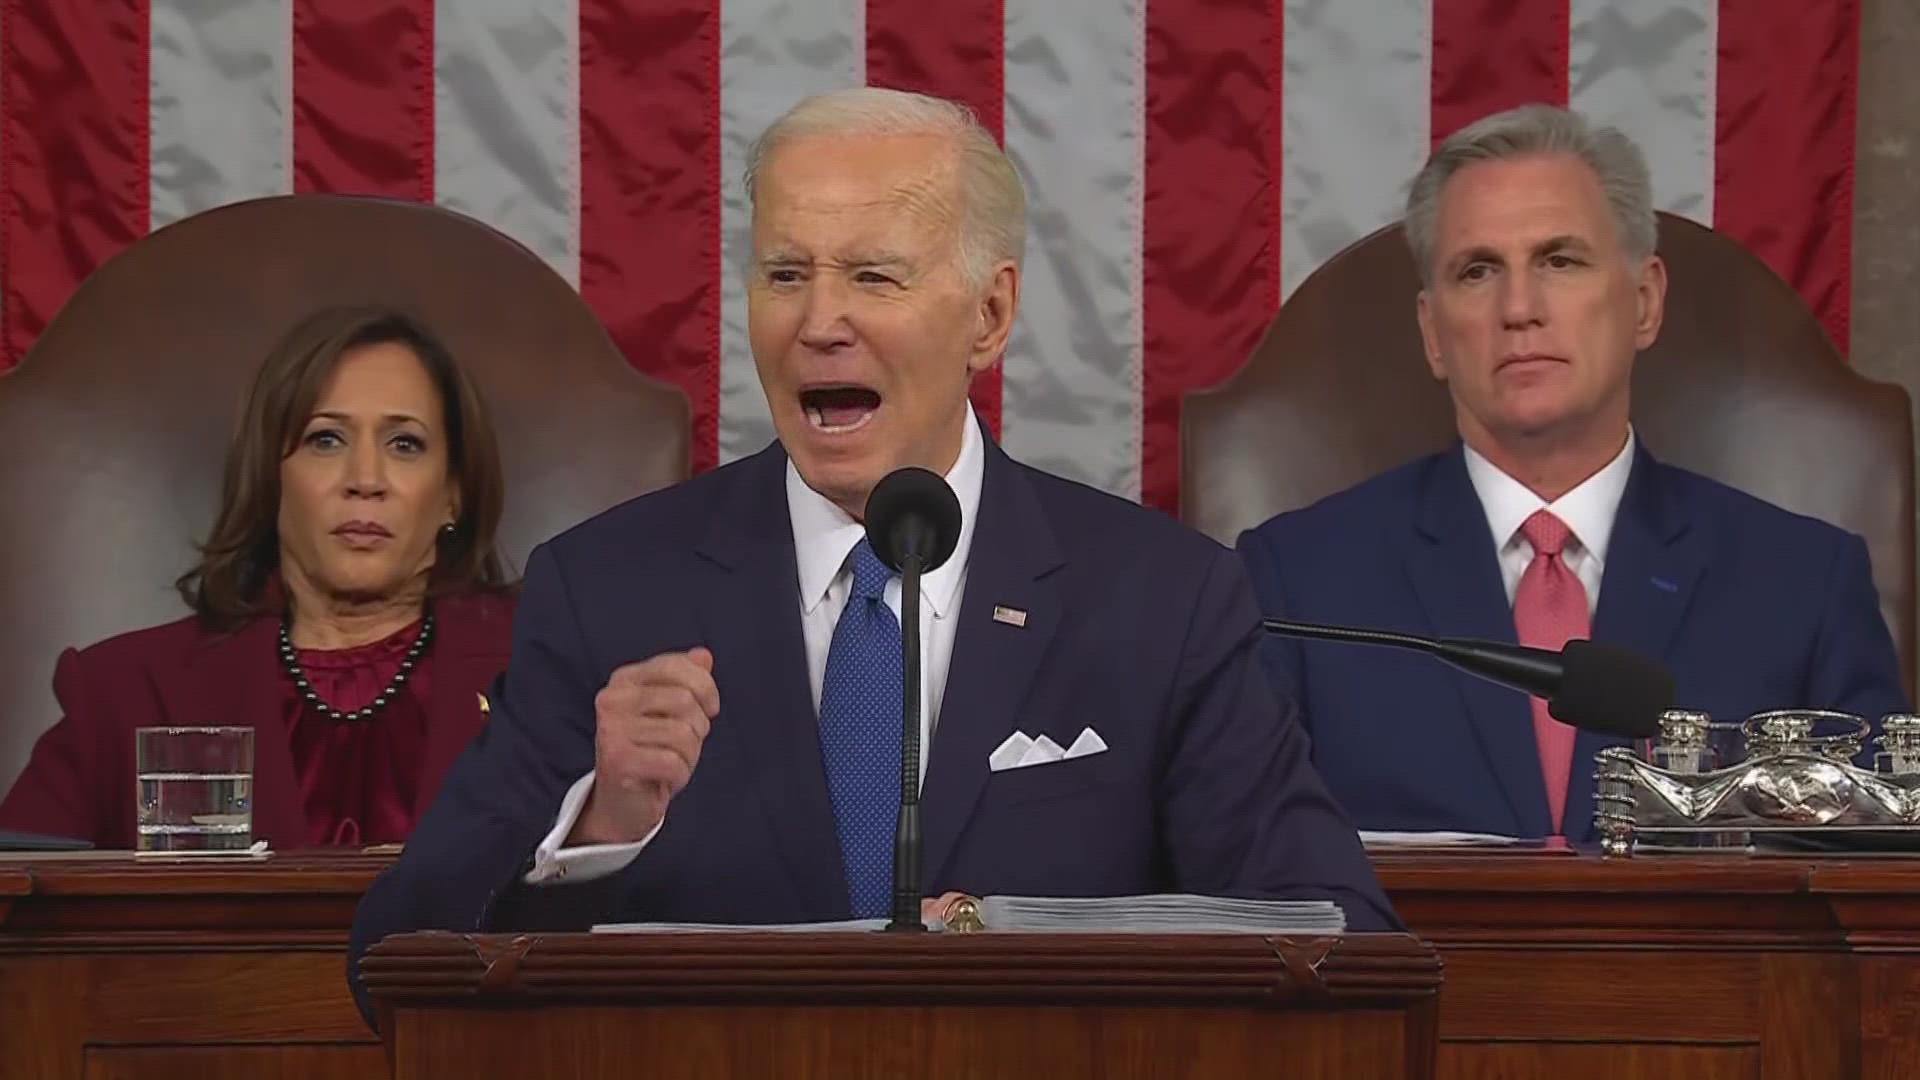 President Biden finished his 2nd State of the Union address by declaring he has "never been more optimistic about the future of America."